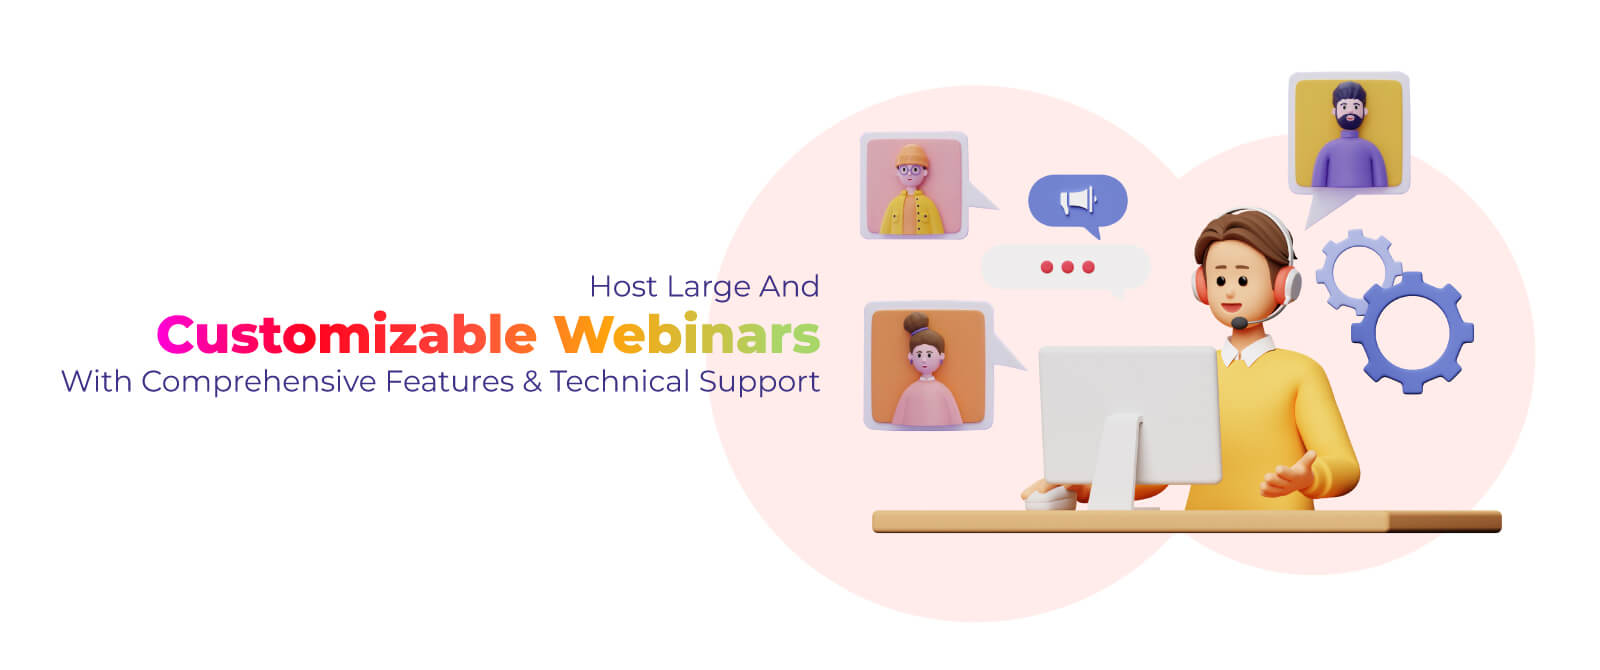 Host Large and Customizable Webinars With Comprehensive Features & Technical Support